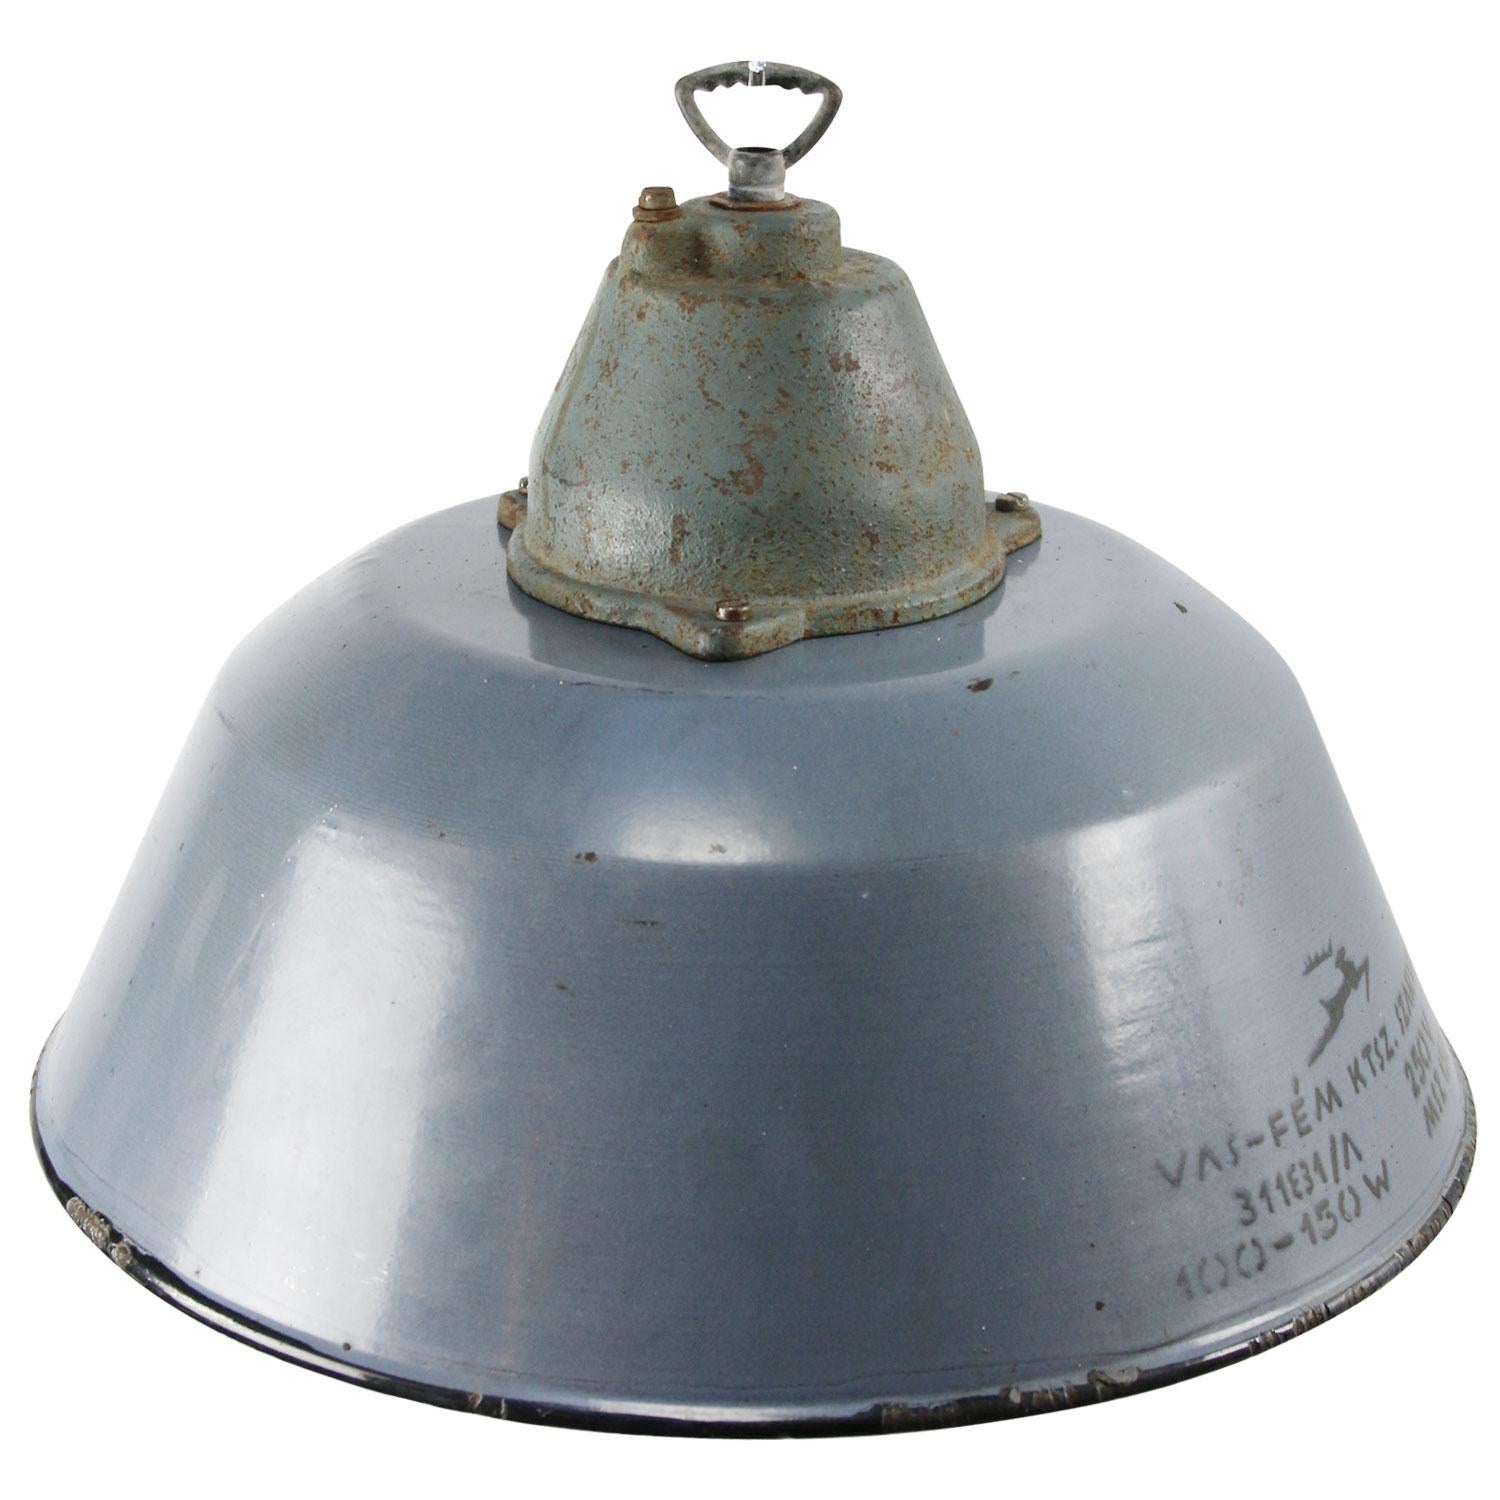 Factory pendant. Blue gray enamel white interior. Cast iron top with clear glass.

Measures: Weight 3.4 kg / 7.5 lb

Priced per individual item. All lamps have been made suitable by international standards for incandescent light bulbs,